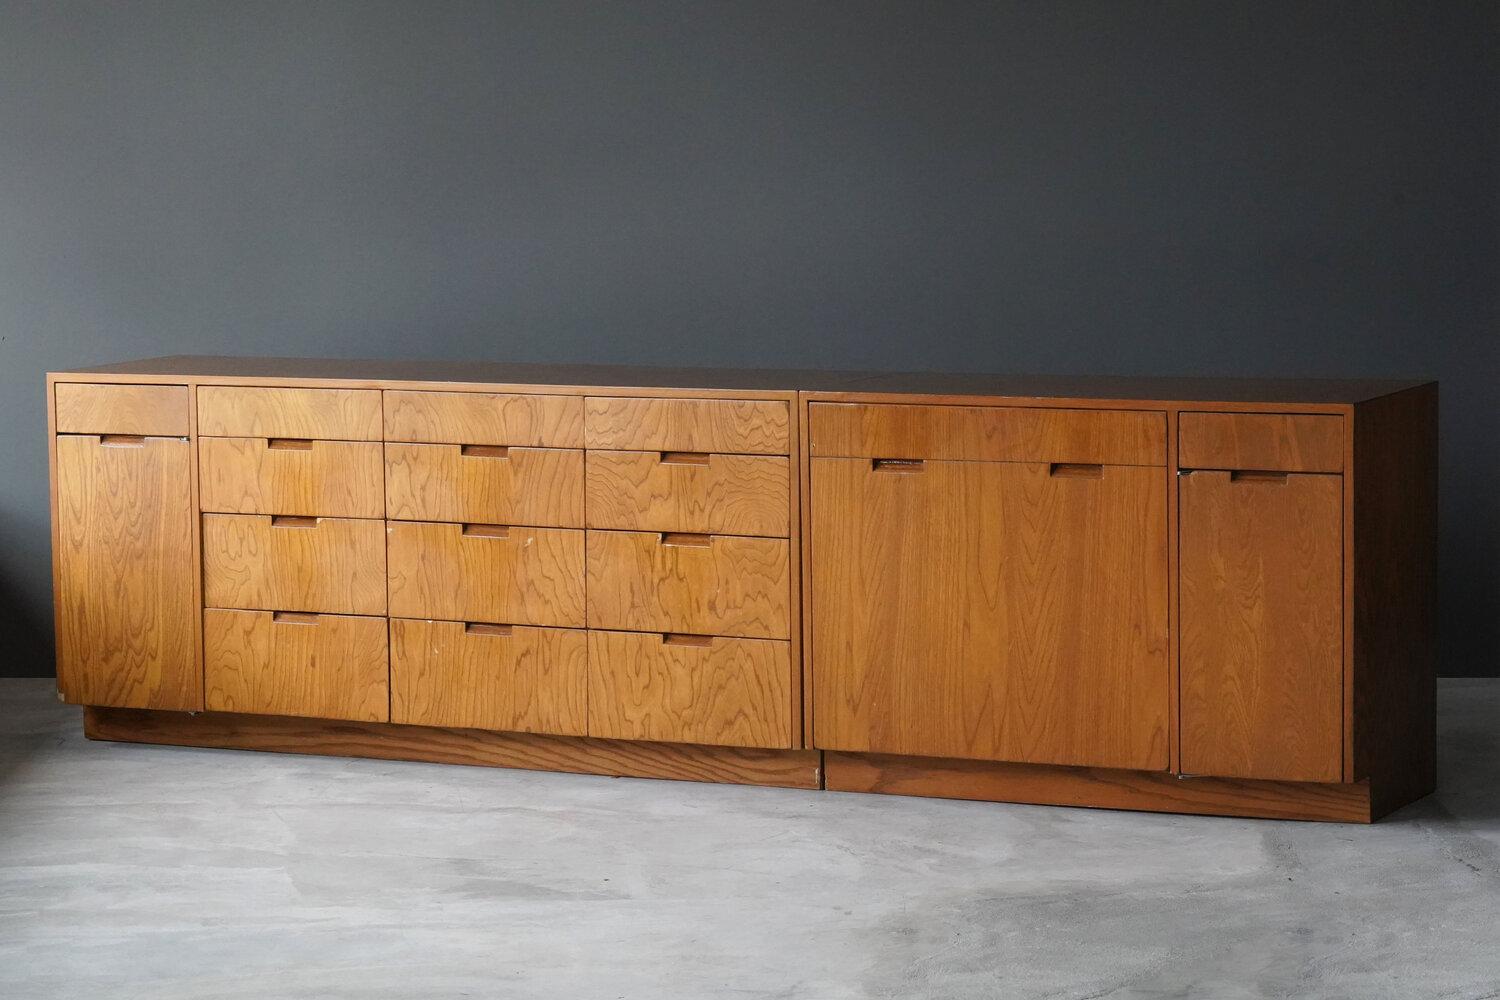 Two unique and sizable cabinets. One chest of drawers, the other featuring laundry-cabinetry. Designed by Richard Neutra for the Brown Sidney House, Holmby Hills, Los Angeles. Detailed provenance available upon request.

Other designers of the